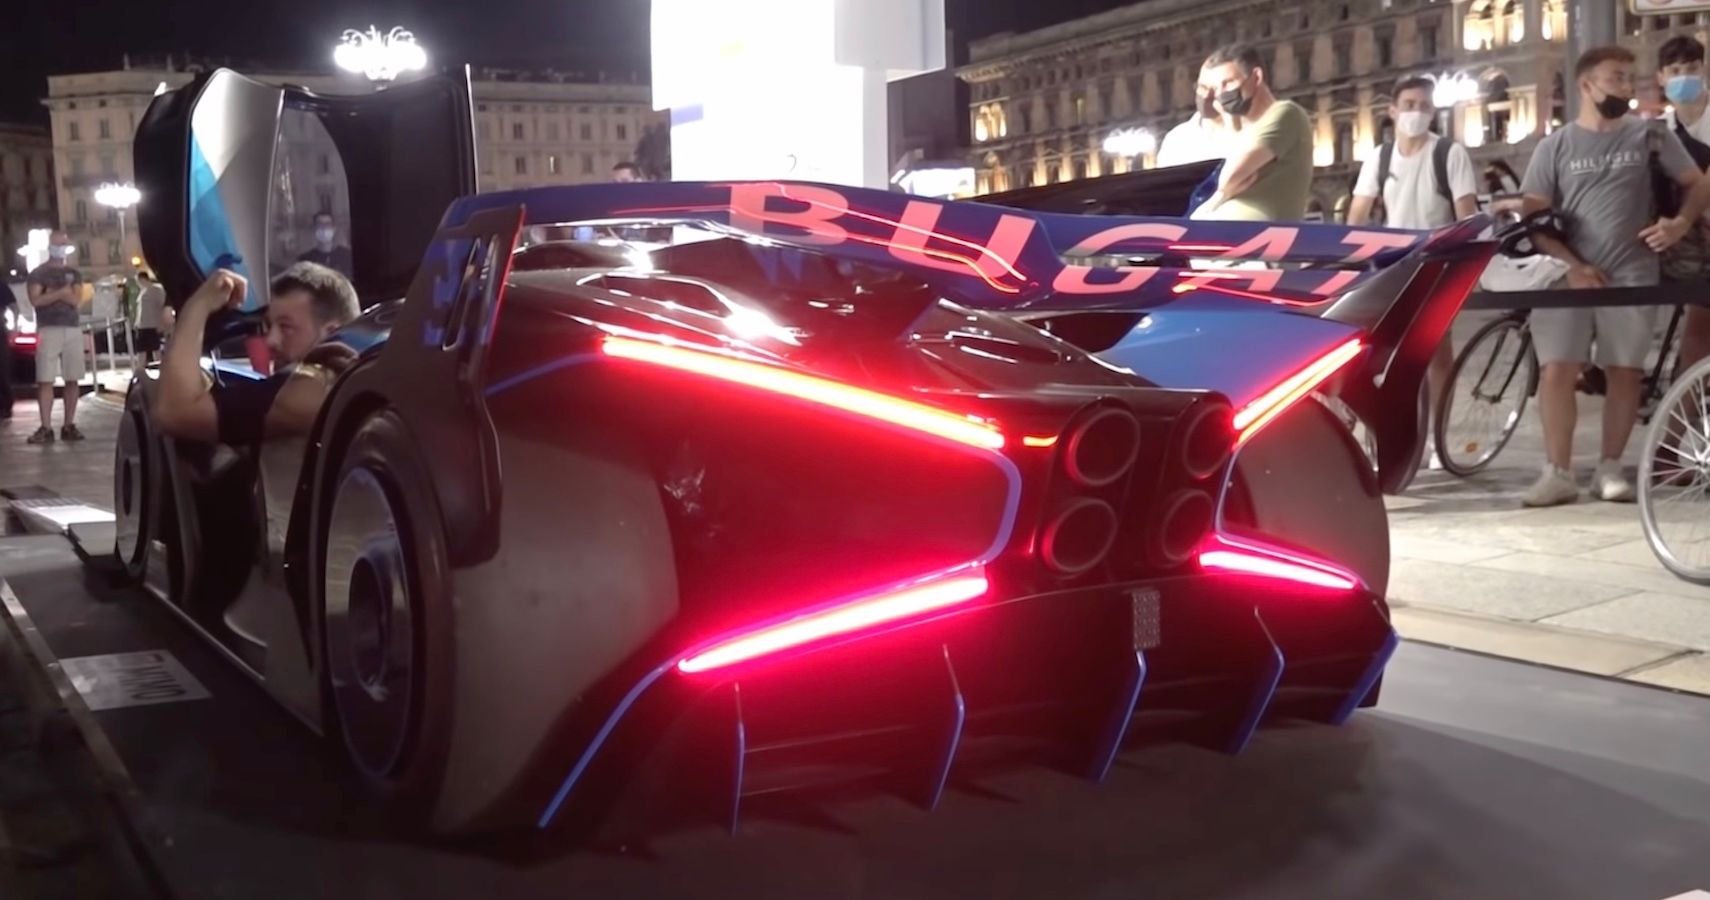 Bugatti Bolide Gets Priceless Reactions From Spectators During Public Appearance